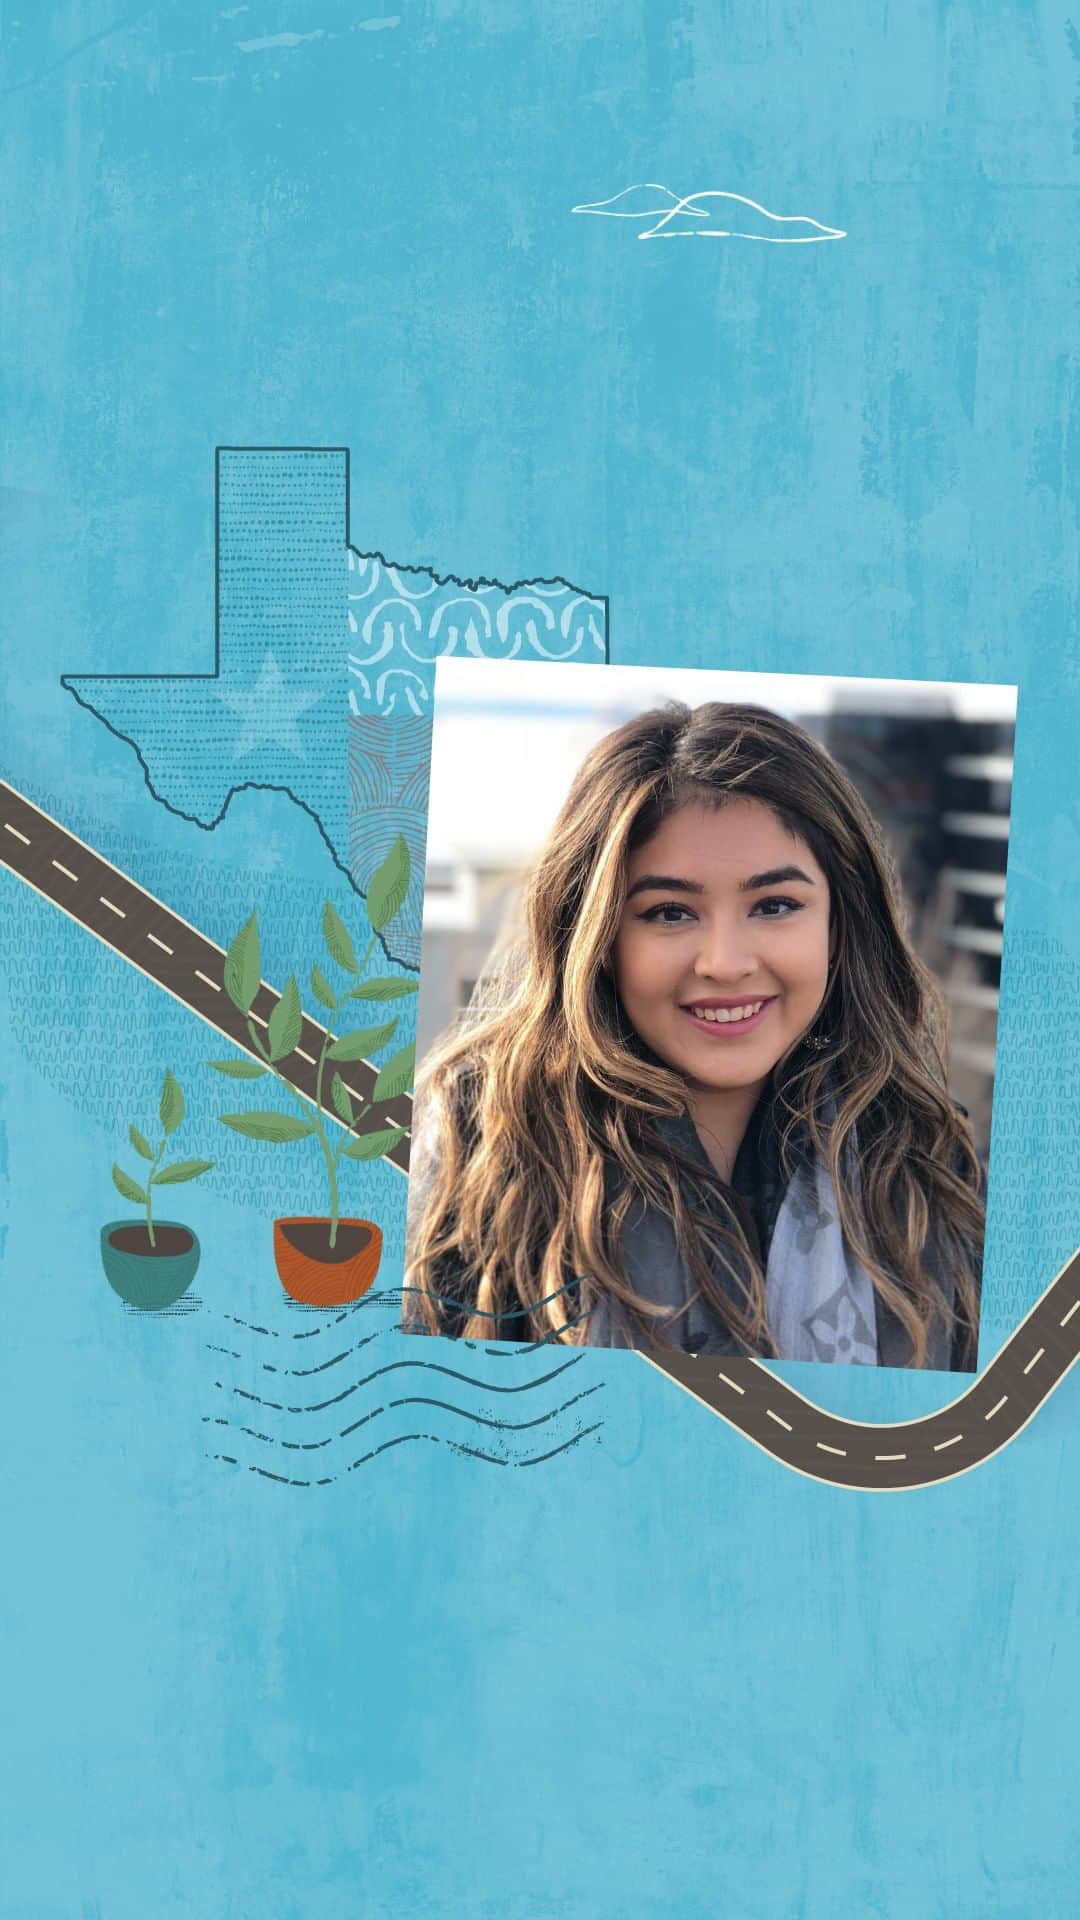 Oracle Corp. （オラクル）のインスタグラム：「Hey y’all! We’re in Austin, Texas visiting Yolanda Villanueva (@yo_wright), who graduated from our Class Of program and chairs our Latinos Alliance. Come along! #HispanicHeritageMonth」